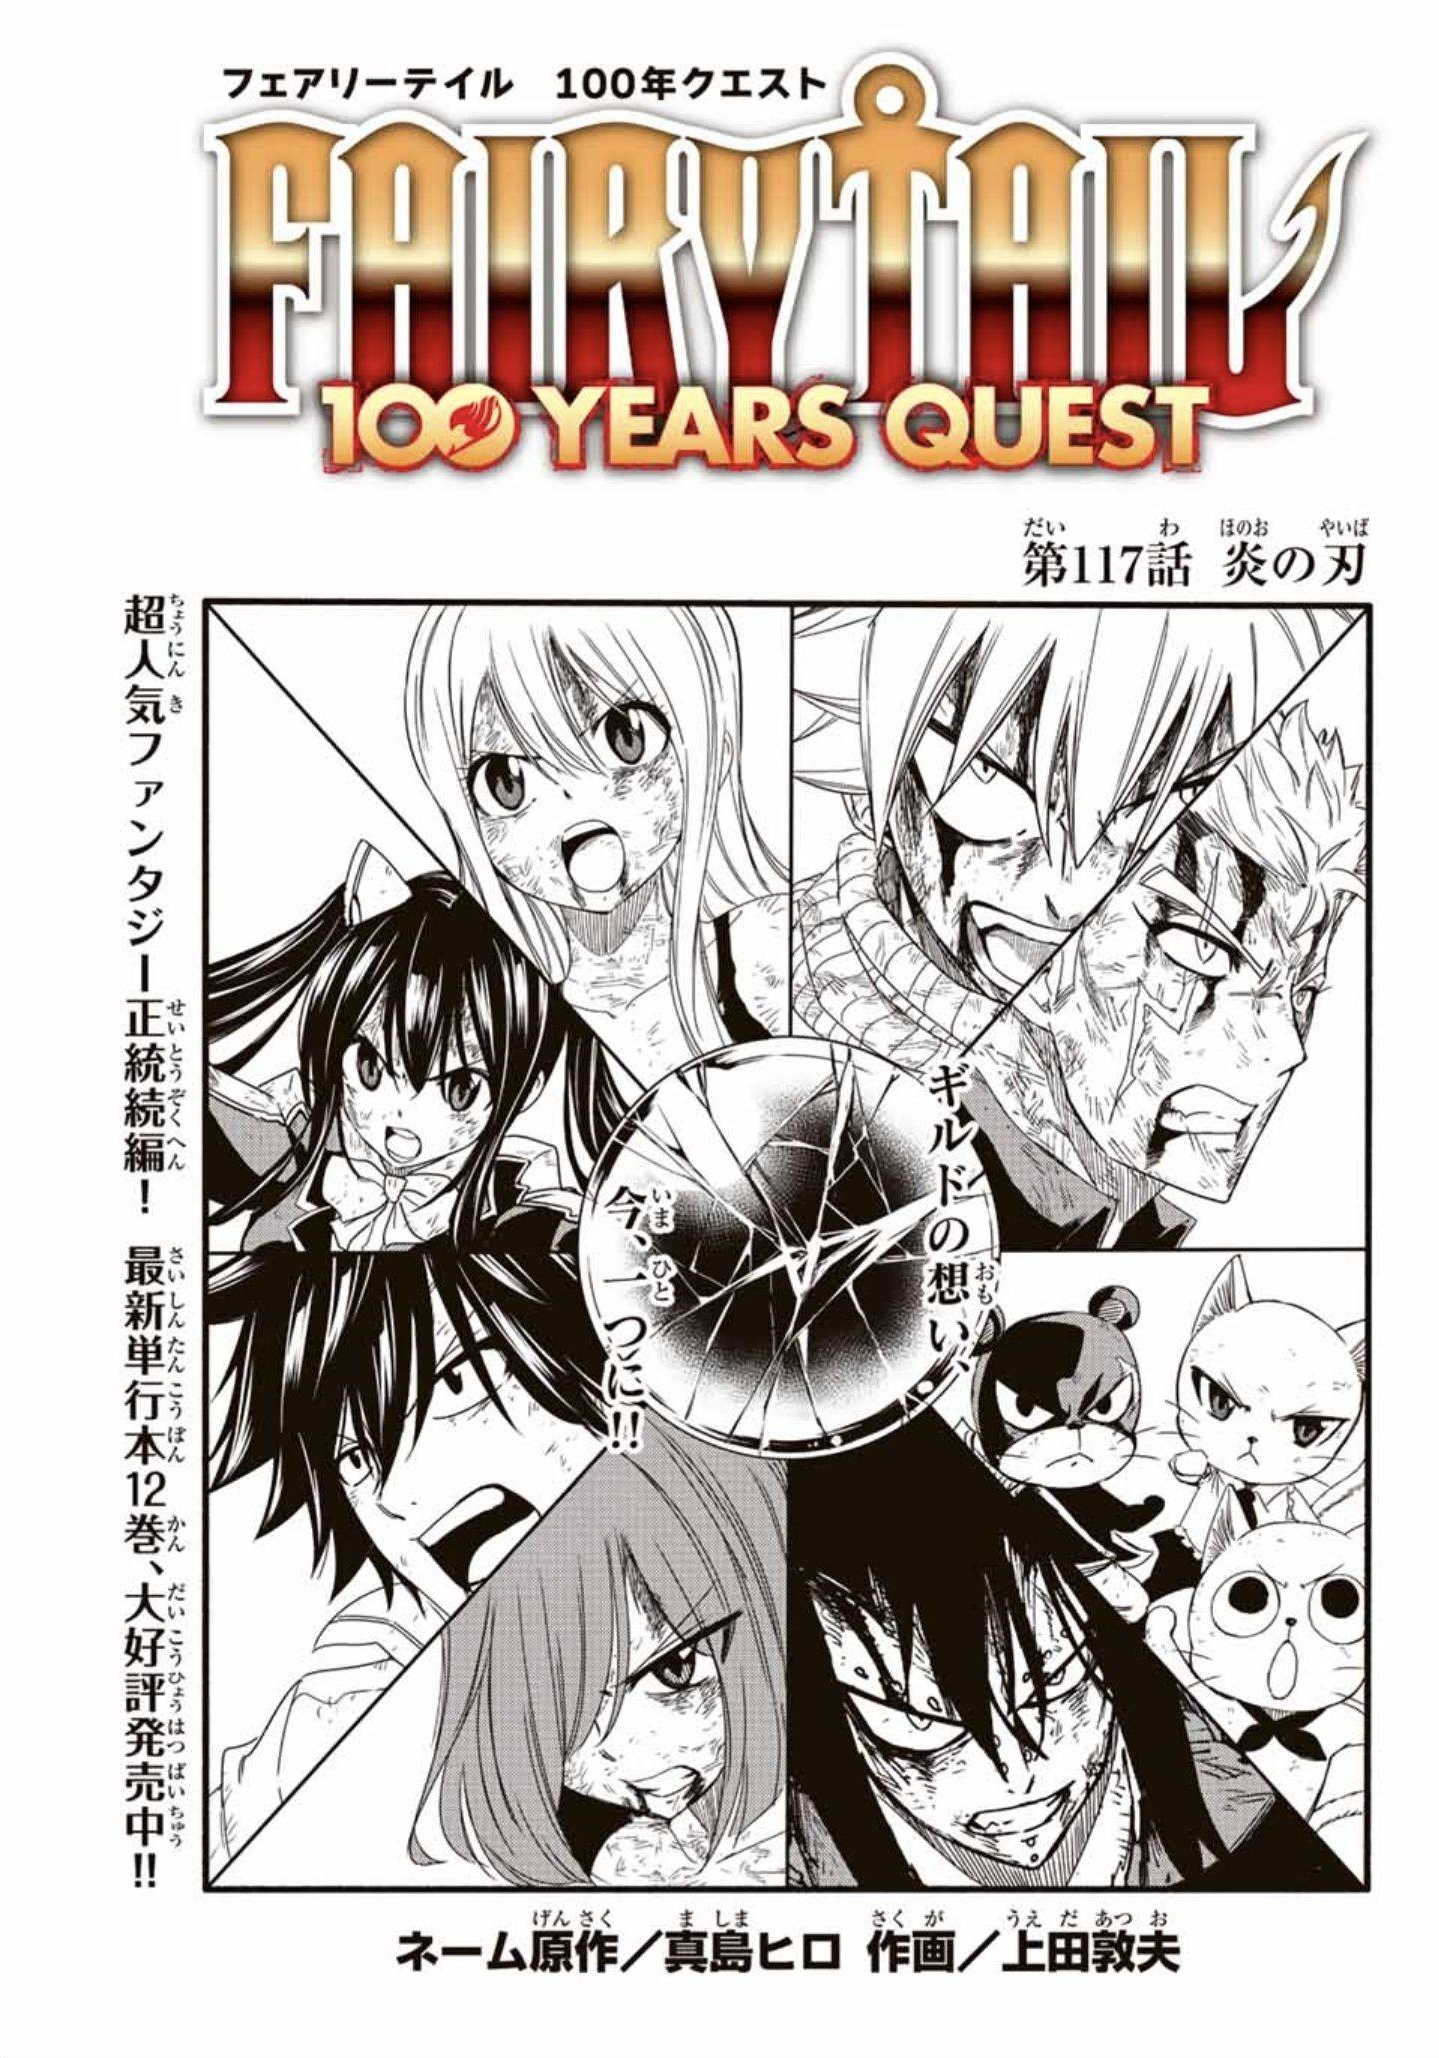 Fairy Tail 100 Years Quest Chapter 117 Fairy Tail Wiki Fandom